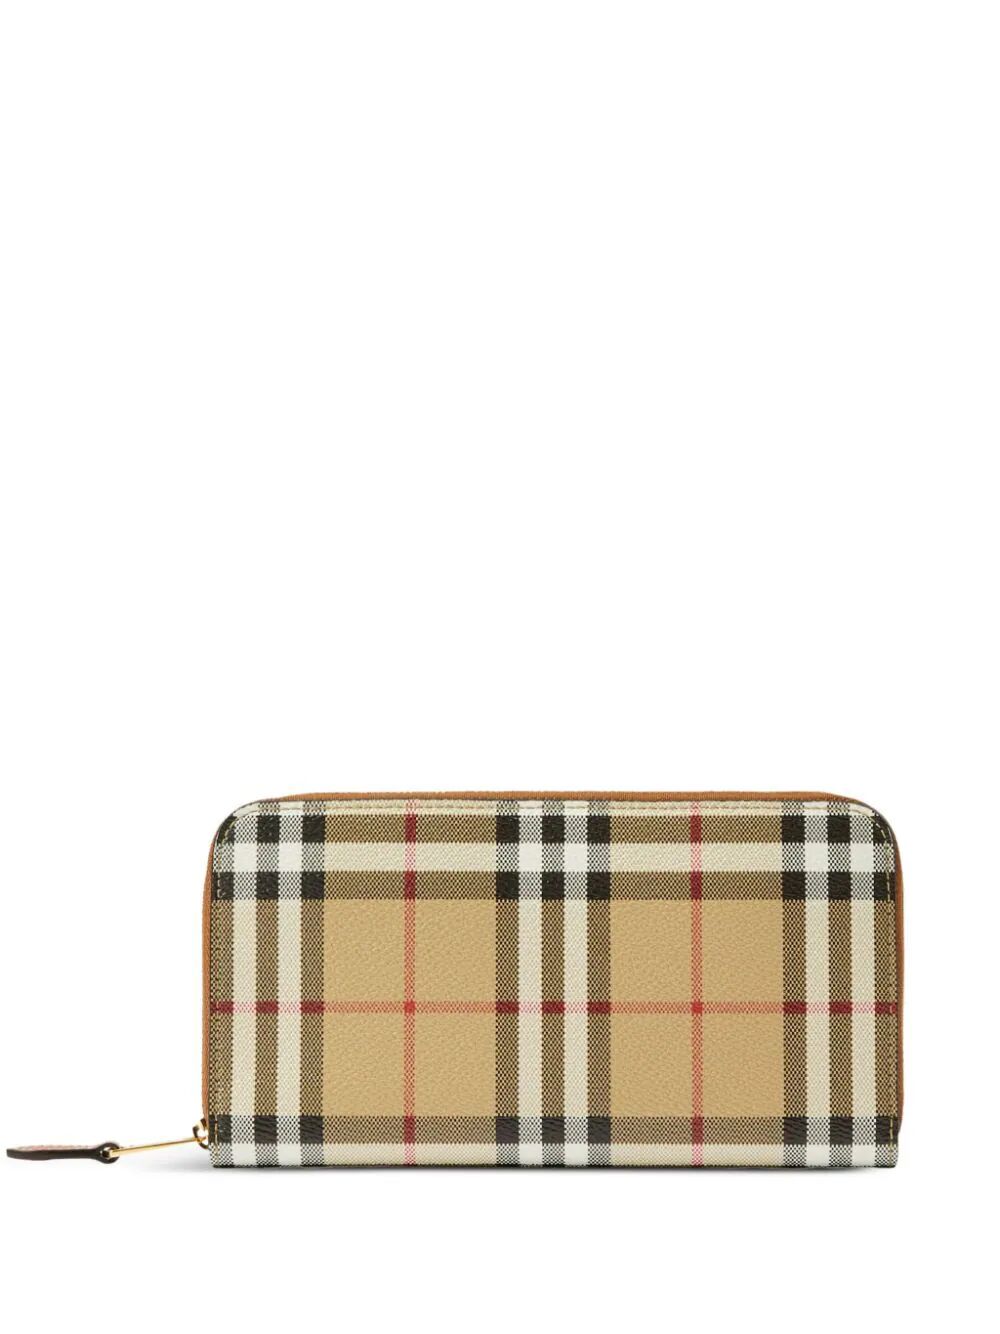 BURBERRY LONDON ENGLAND CHECK WALLET WITH ZIPPER